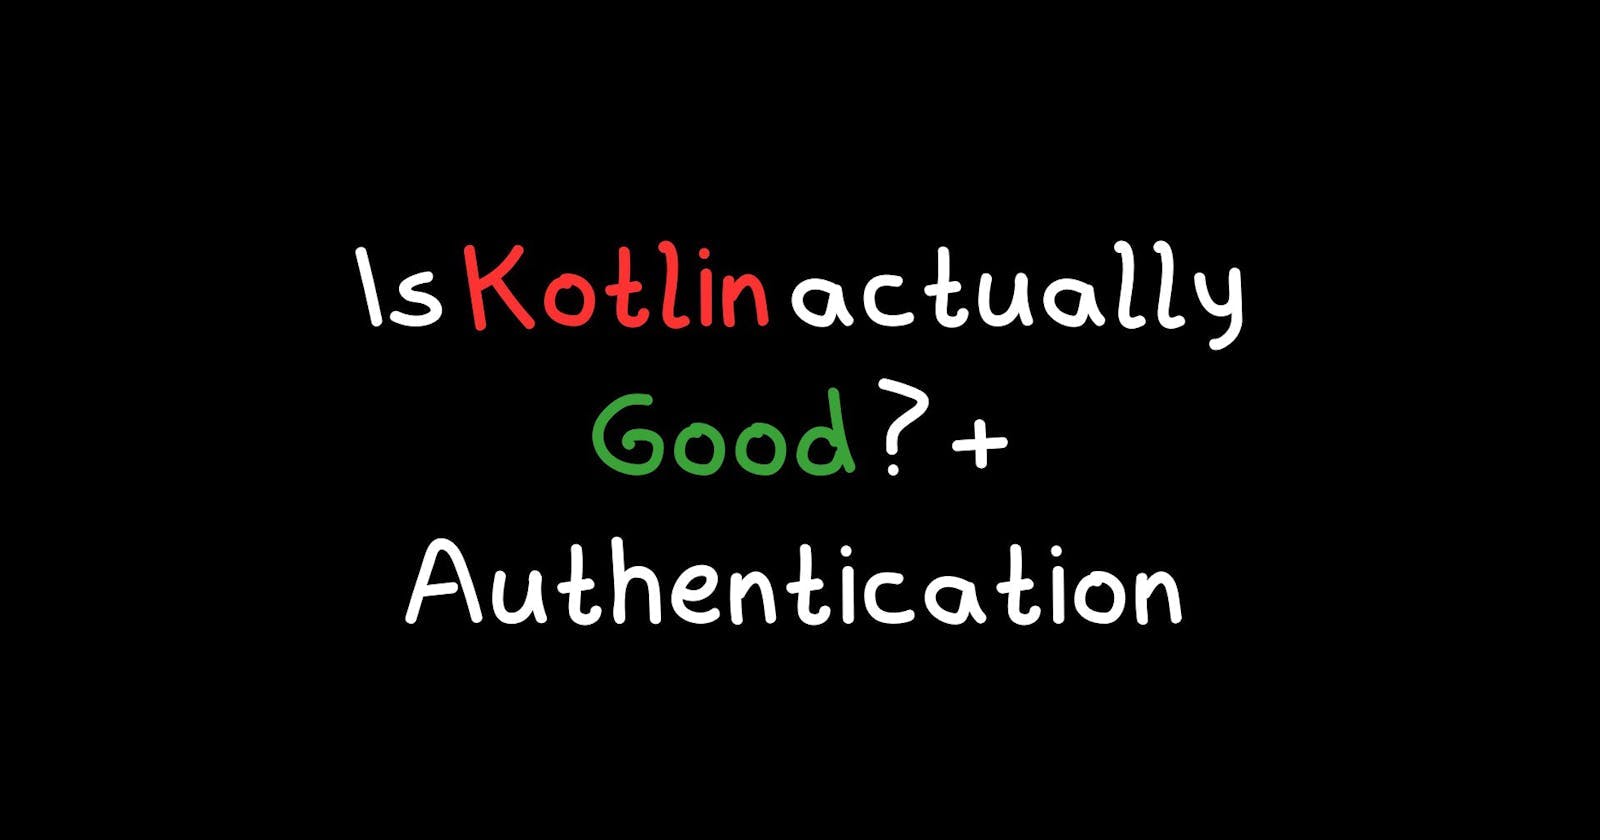 Is Kotlin actually Good ? + Authentication (Day 3) - Creating a SaaS Startup in 30 Days